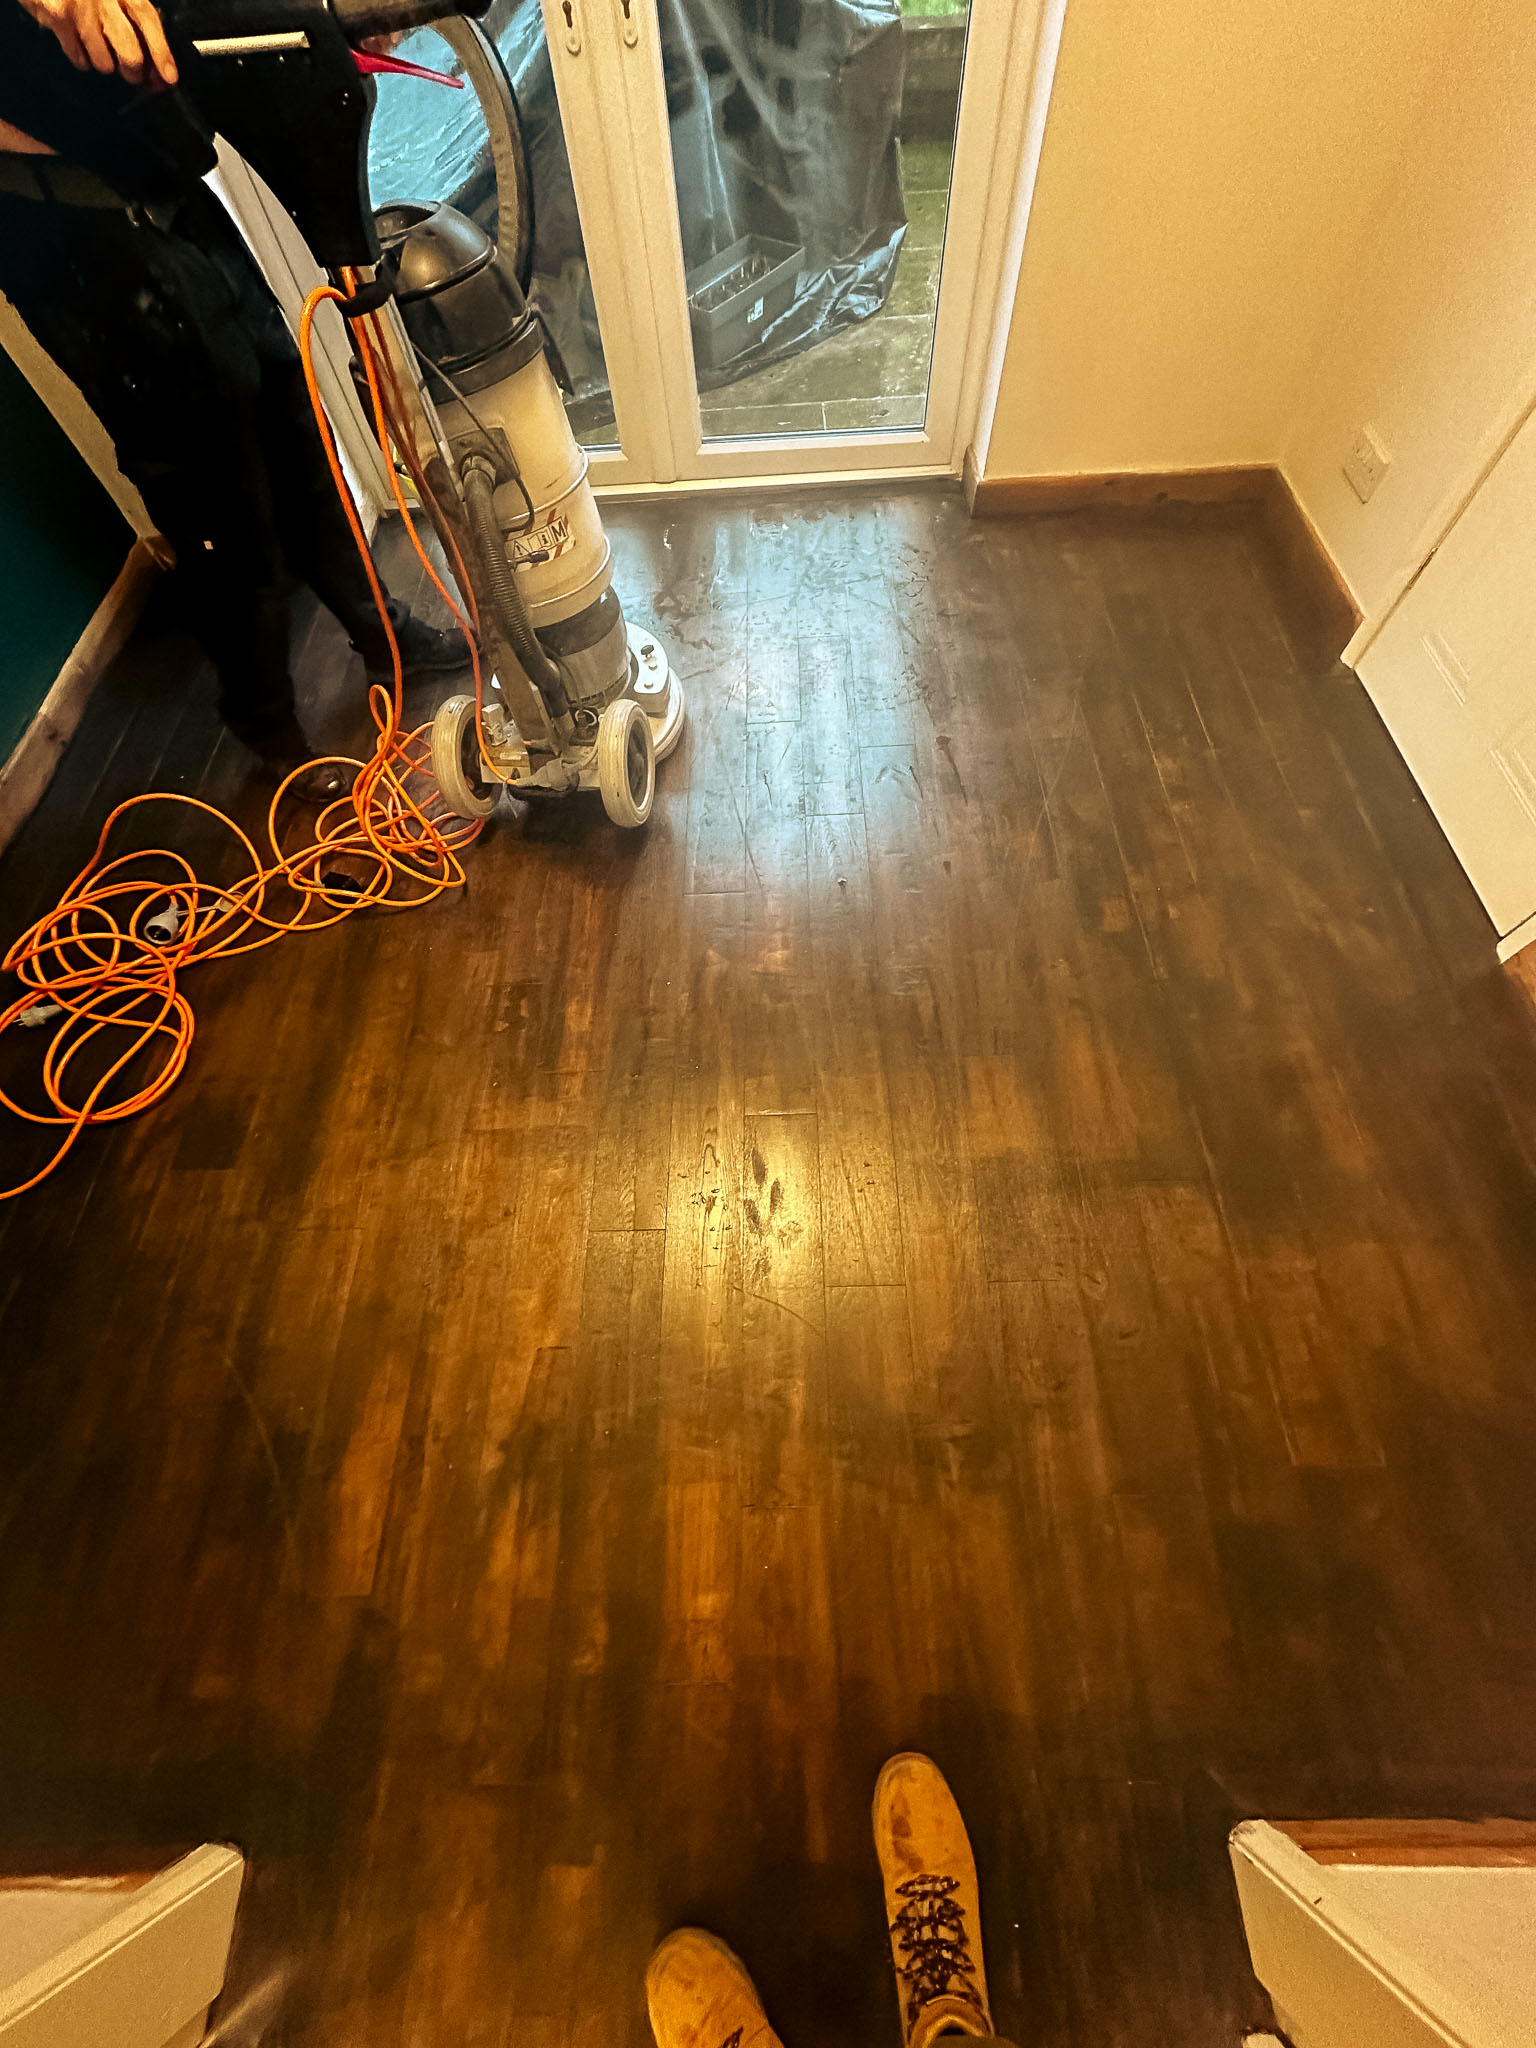 Wood floor sanding and restoration in Harrogate by TF Building and renovations. Hard wax oil finish